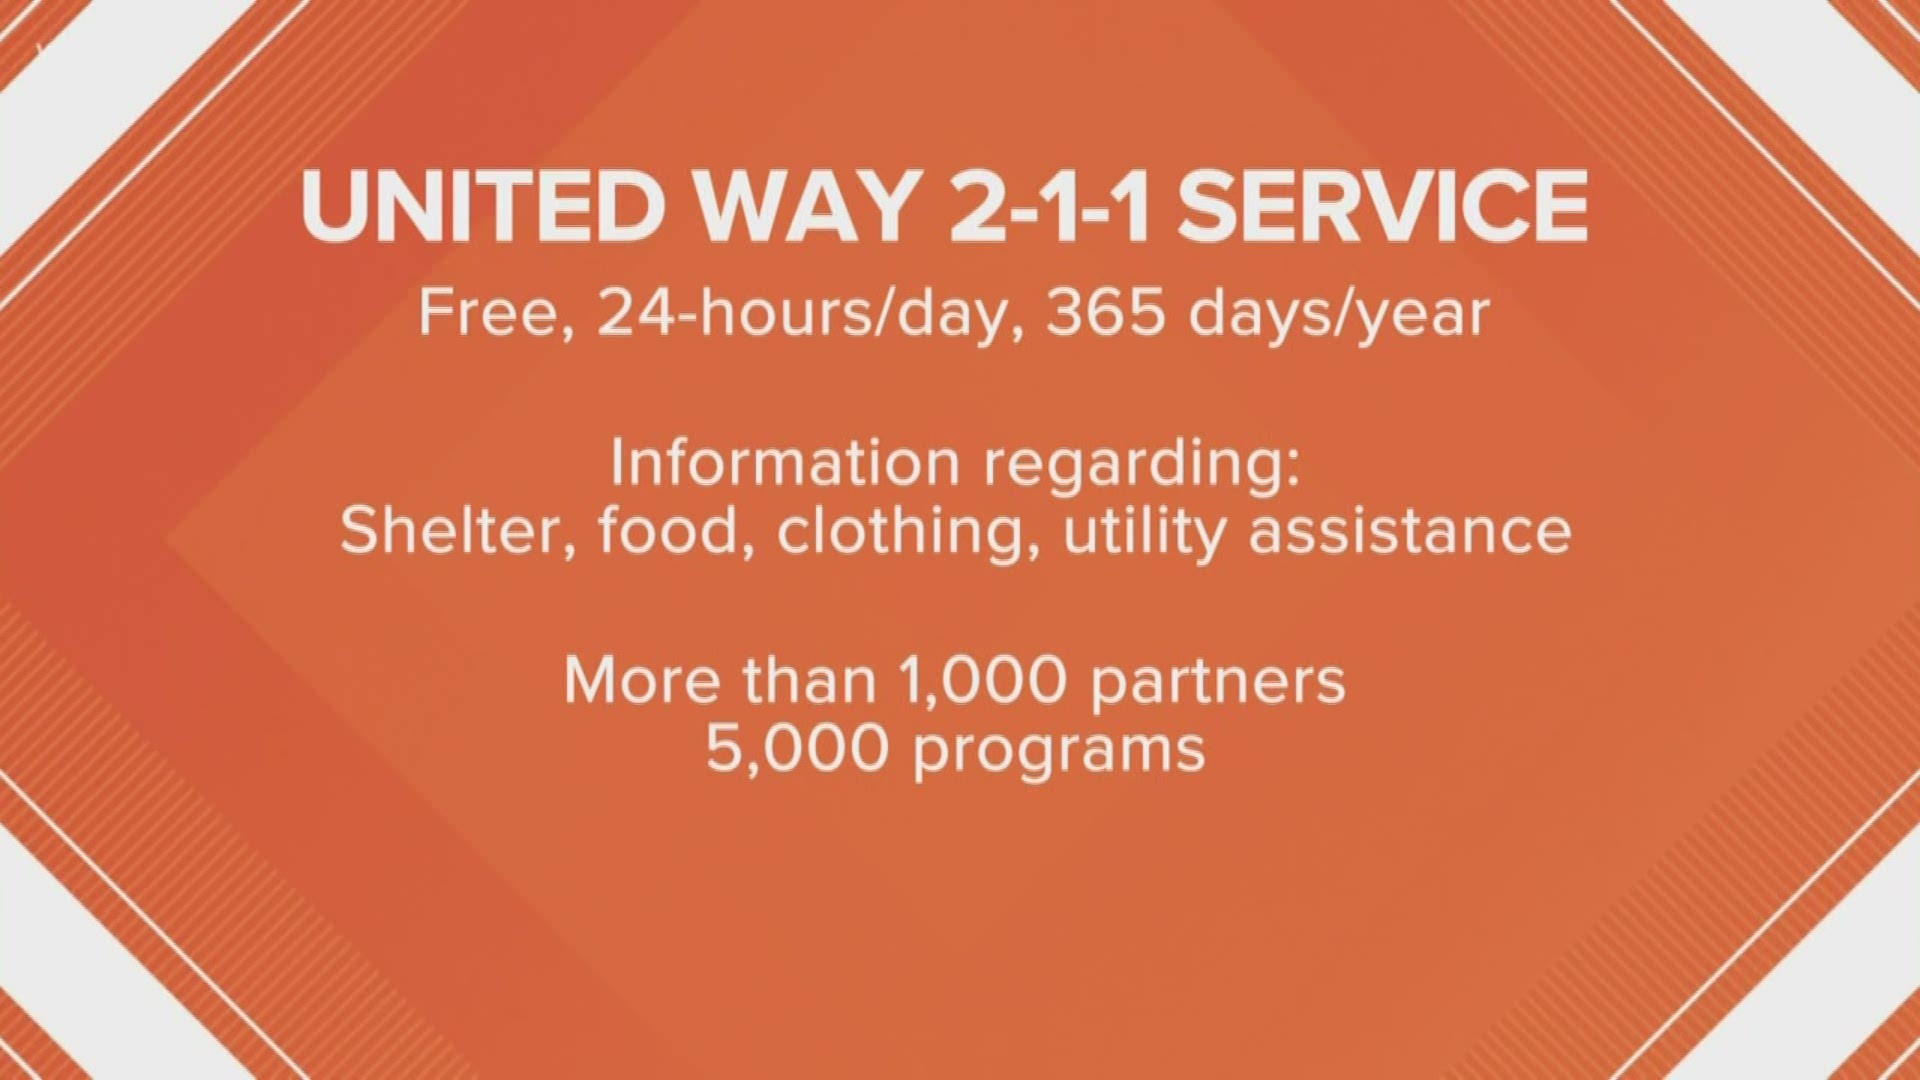 Feb. 11 is 211 day, the number of the United Way of Greater Toledo. You can call them any time you need help with food, shelter, clothing and utility assistance.